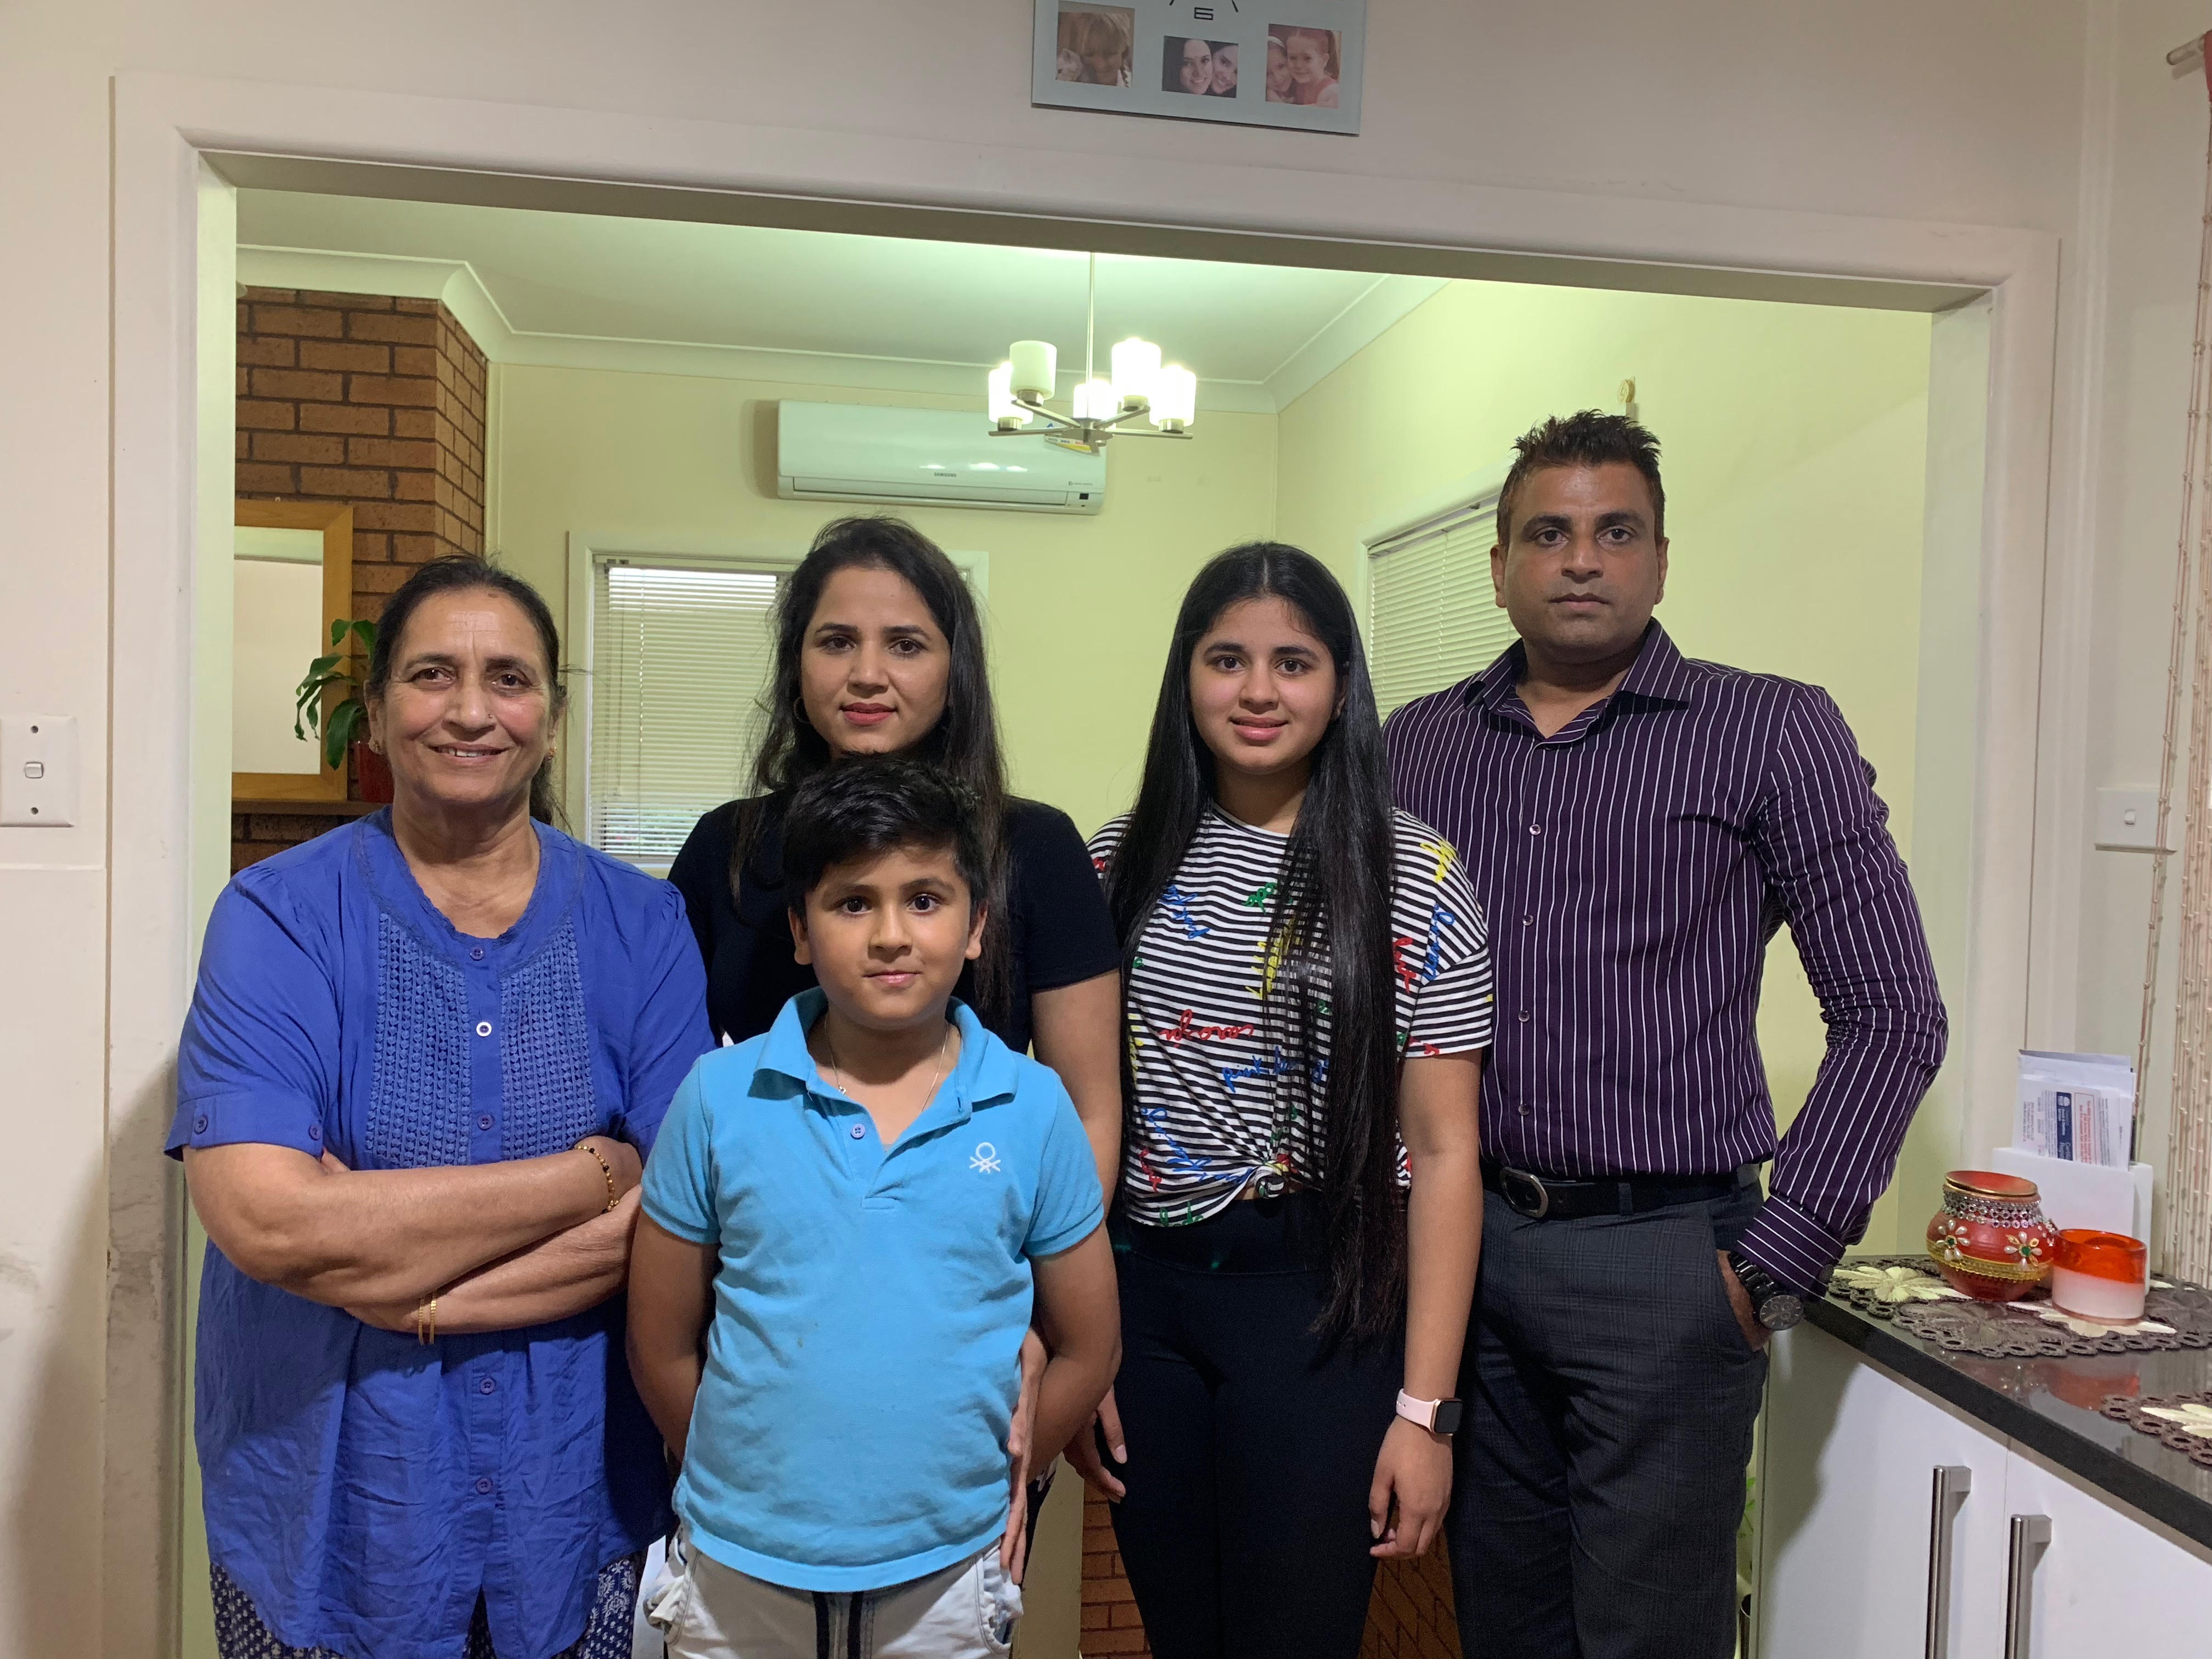 The Sood family say they are taking basic precautions during the coronavirus outbreak. 